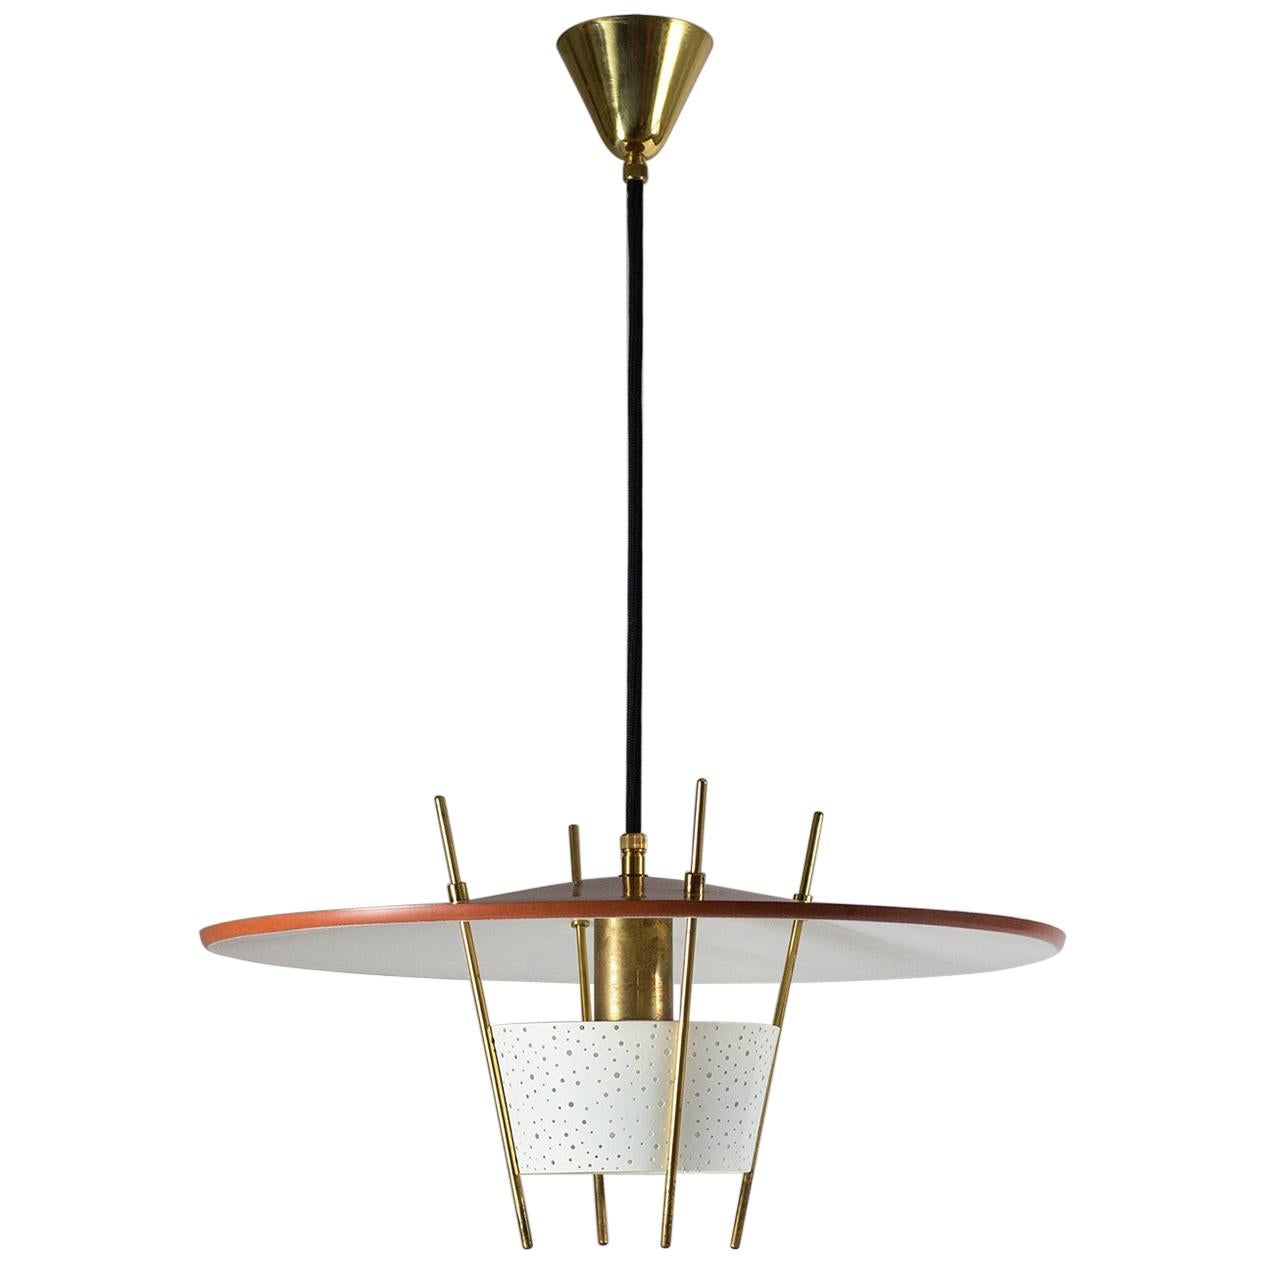 1950s Pendant by Ernest Igl, Pierced Metal and Brass